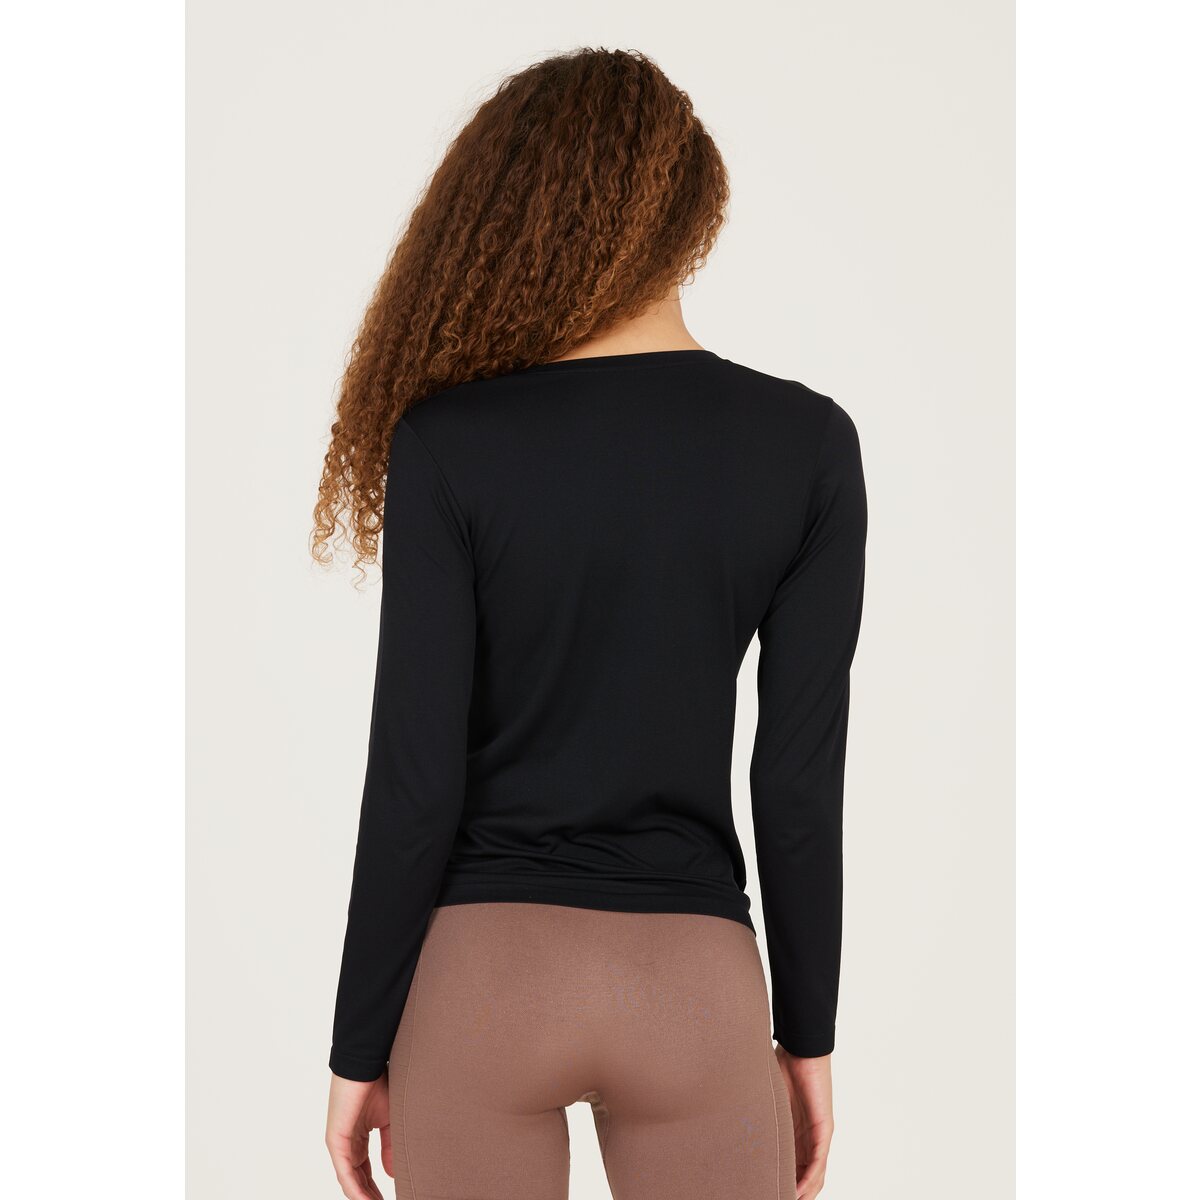 Athlecia Julee Womenswear Loose Fit Long Sleeve Seamless Tee - Black 2 Shaws Department Stores